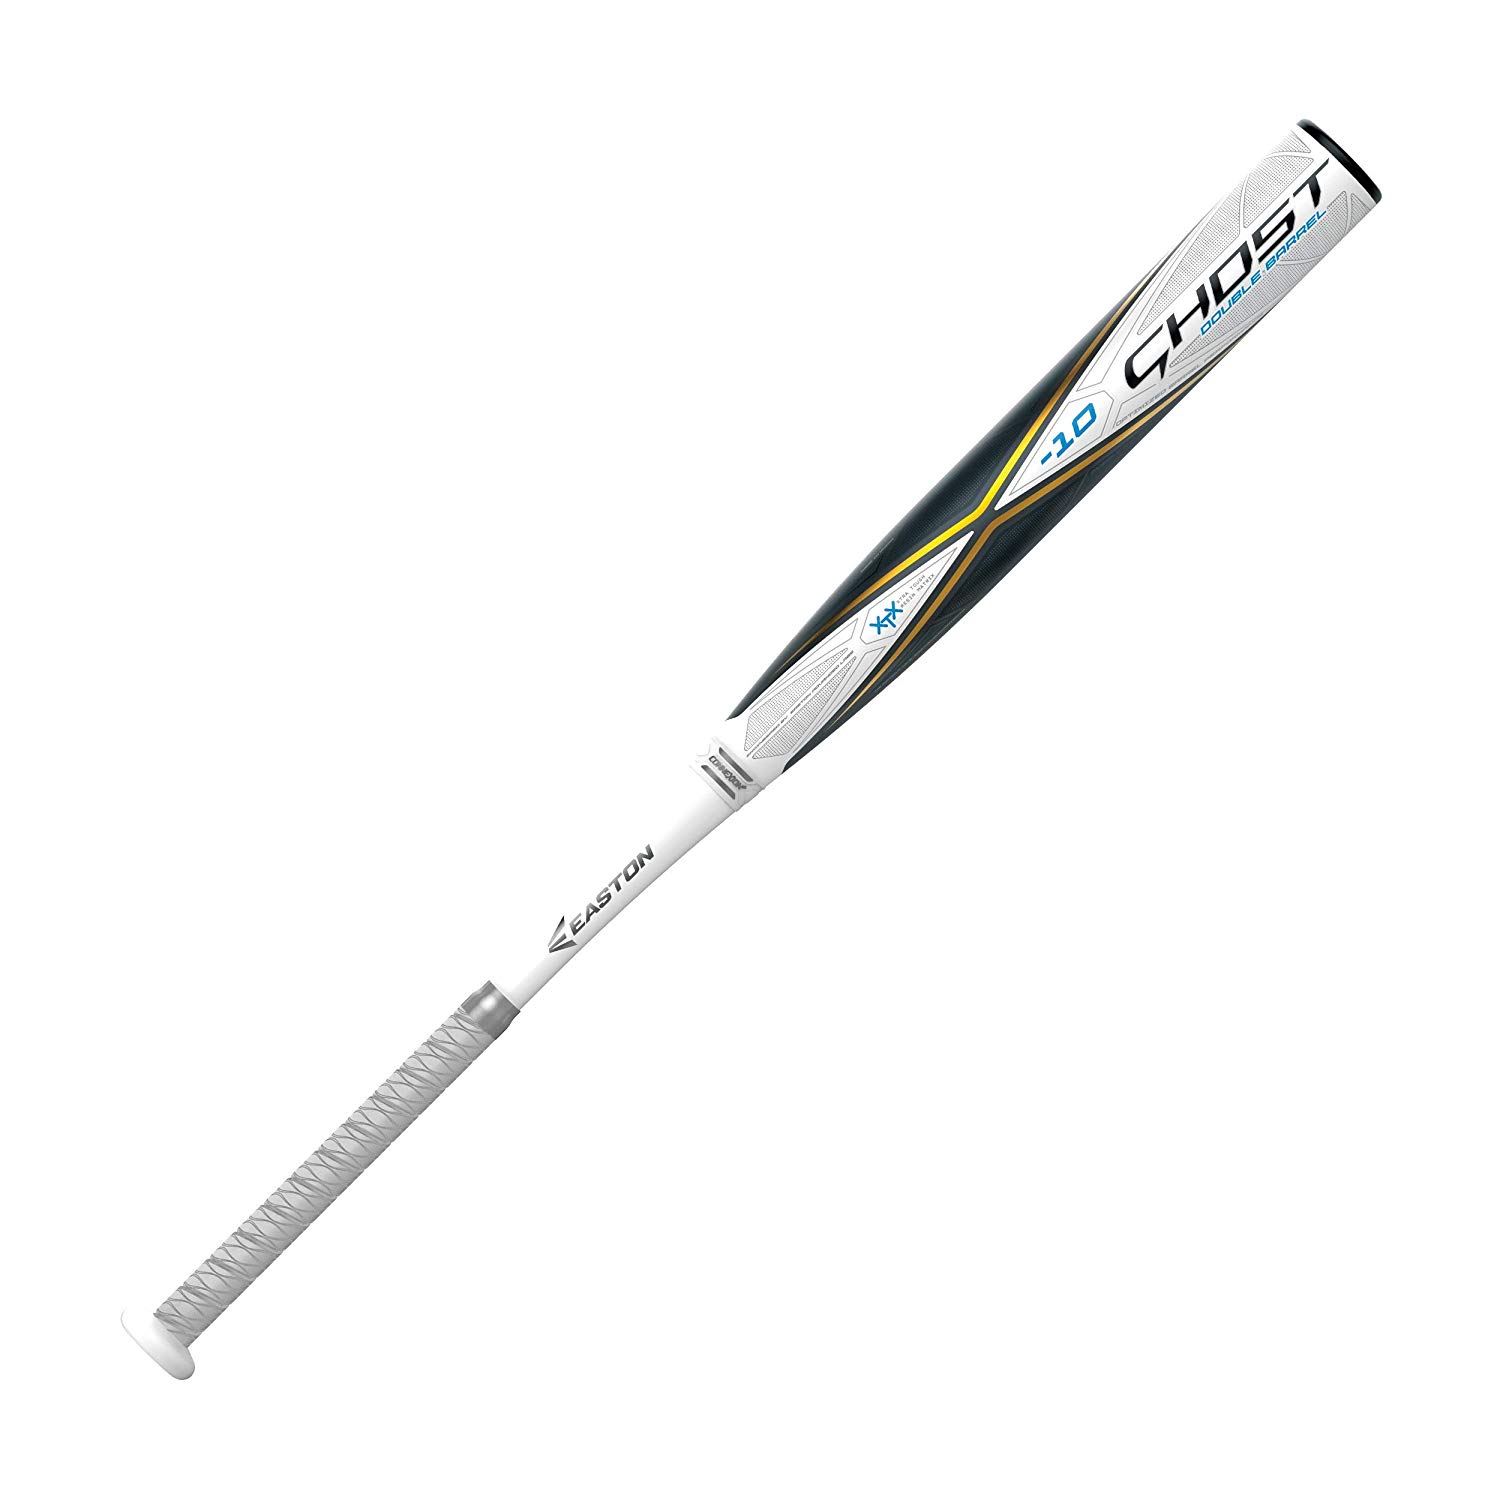 easton-ghost-10-fastpitch-softball-bat-2020-dual-stamp-31-inch-21-oz FP20GH102020-3121 Easton 628412264096 Patent-pending Double Barrel construction is the ultimate combination of feel pop